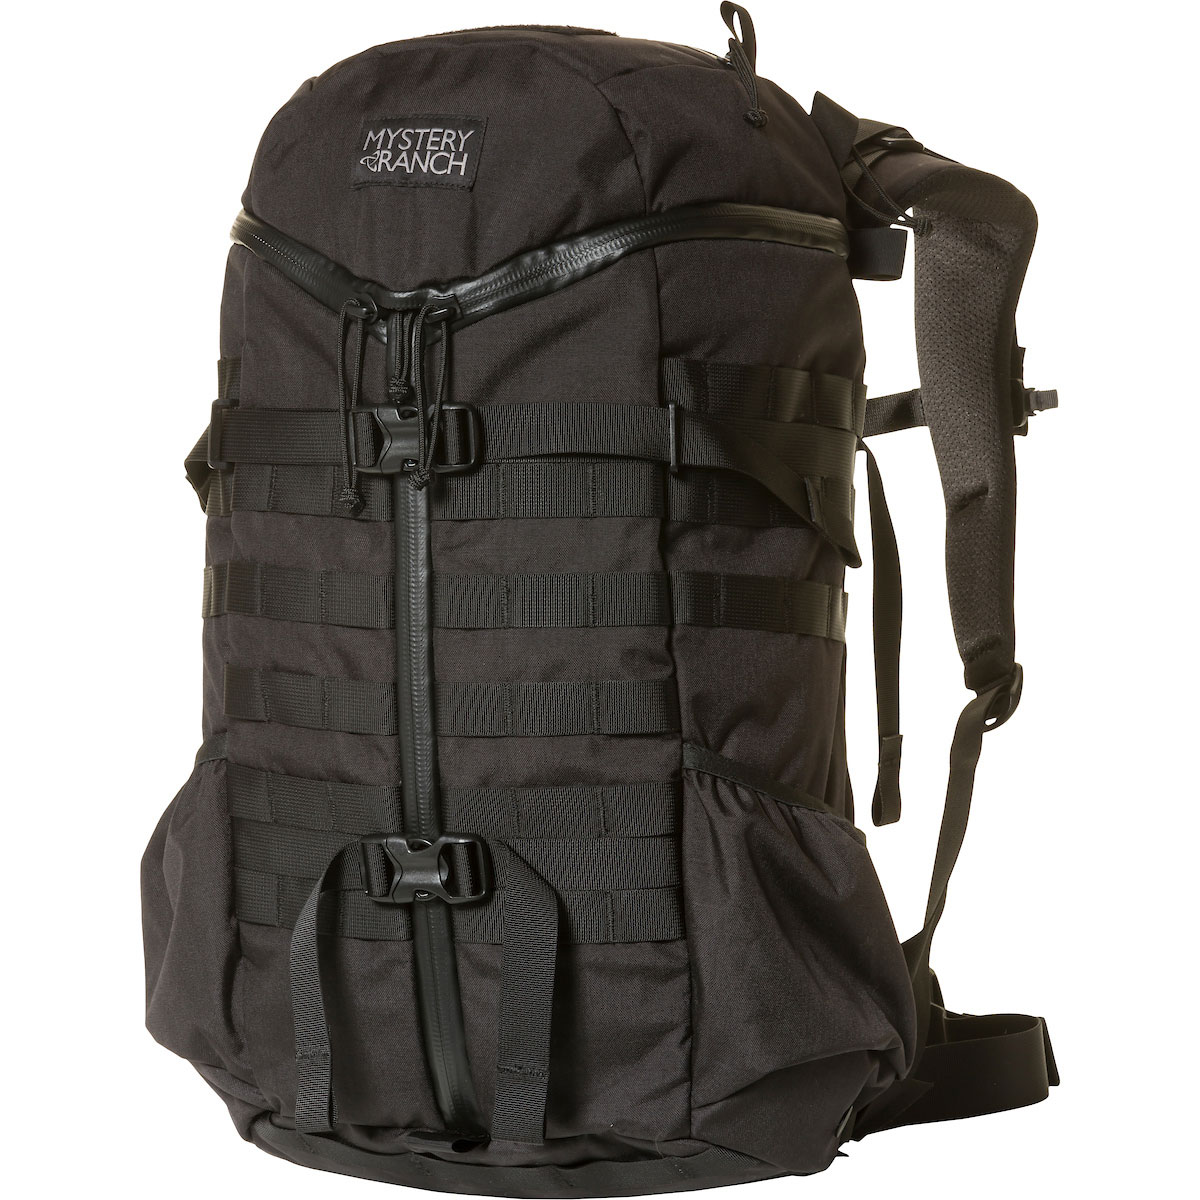 2 Day Assault Pack | MYSTERY RANCH Backpacks